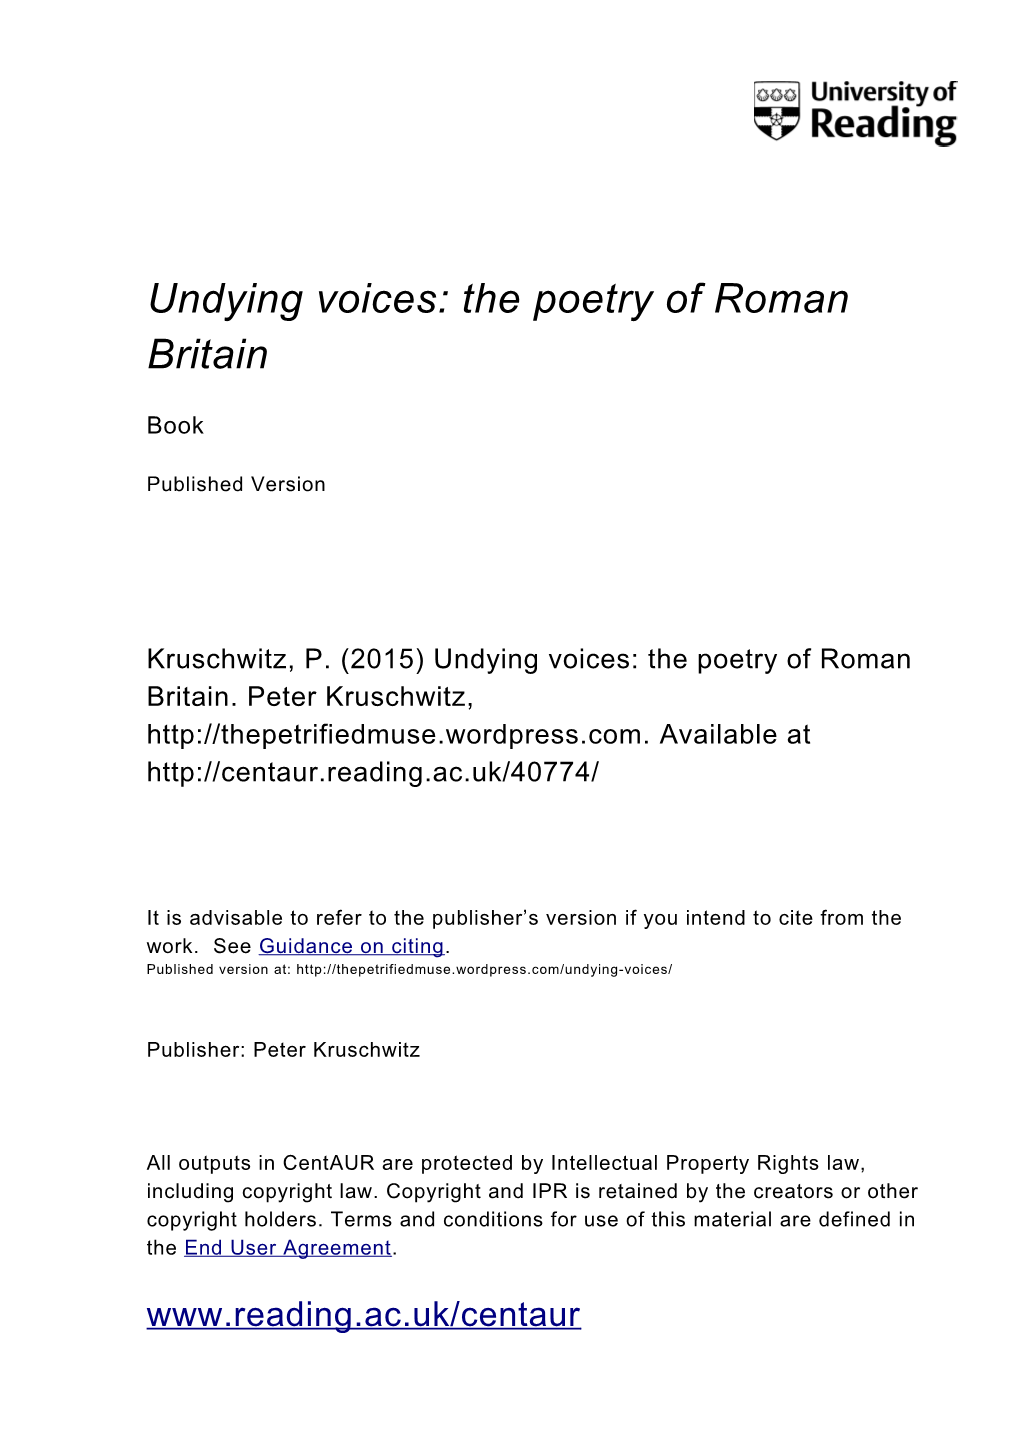 Undying Voices: the Poetry of Roman Britain